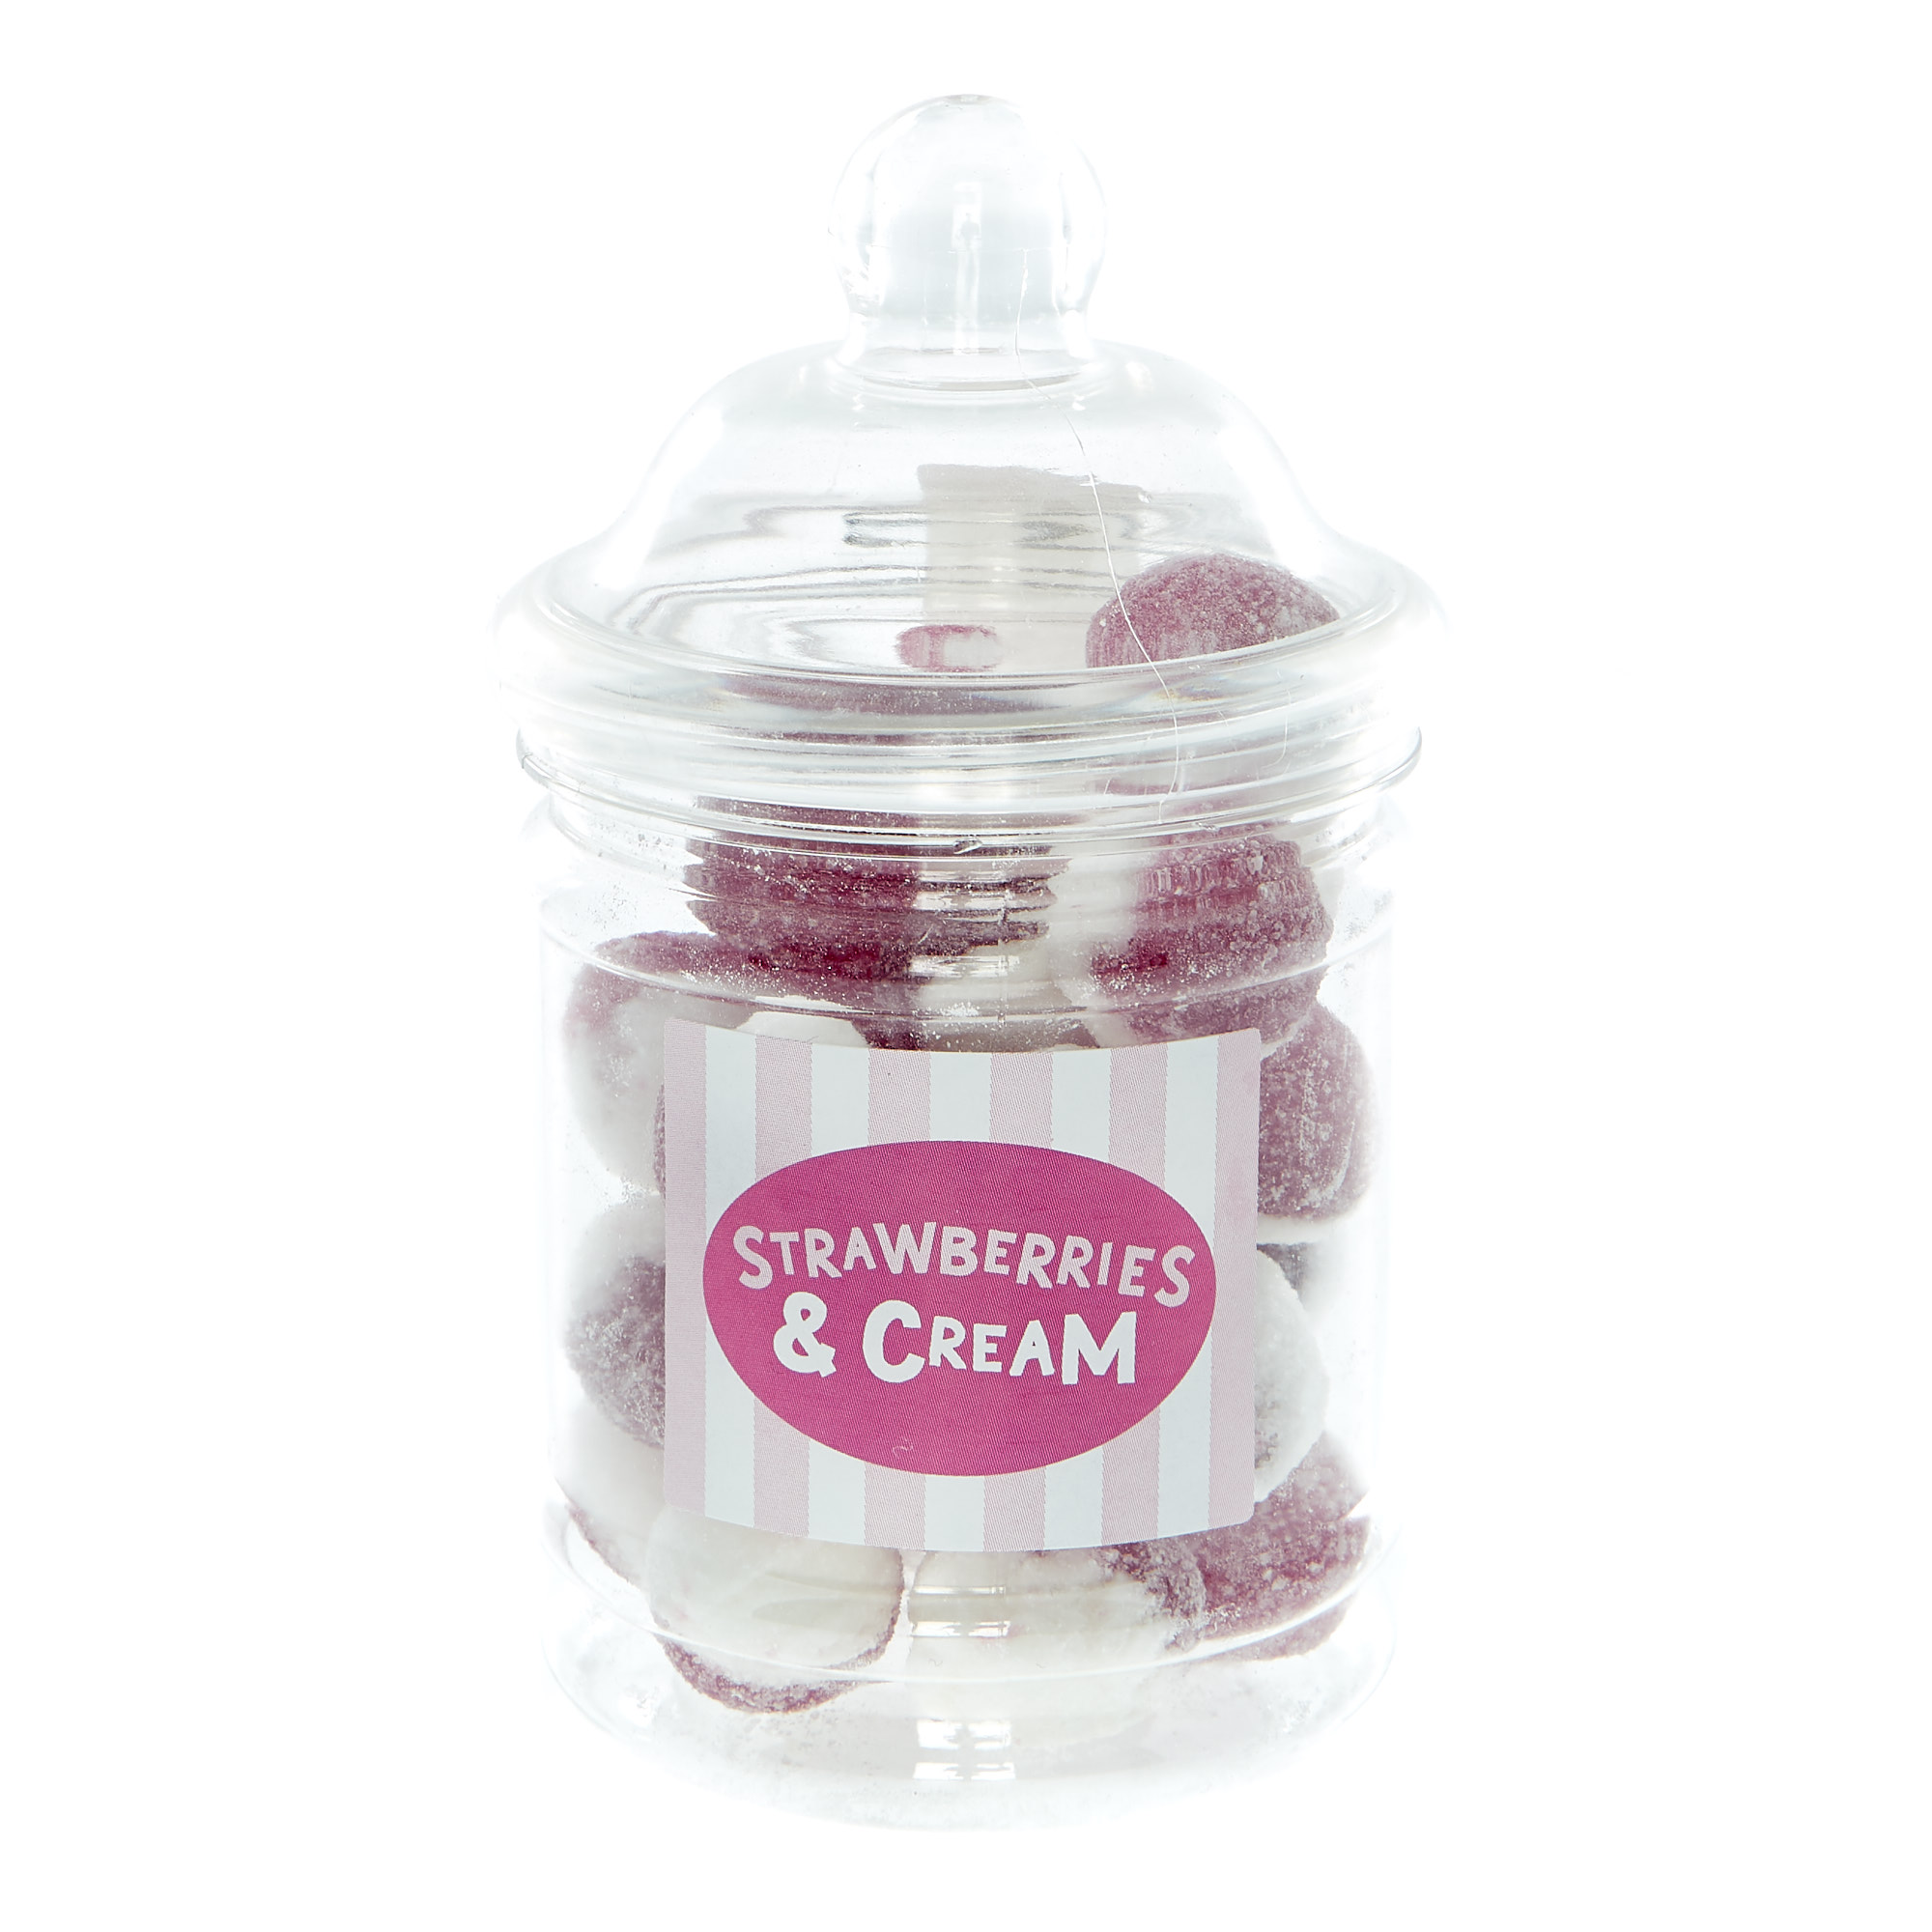 Strawberries & Cream Boiled Sweets In A Jar